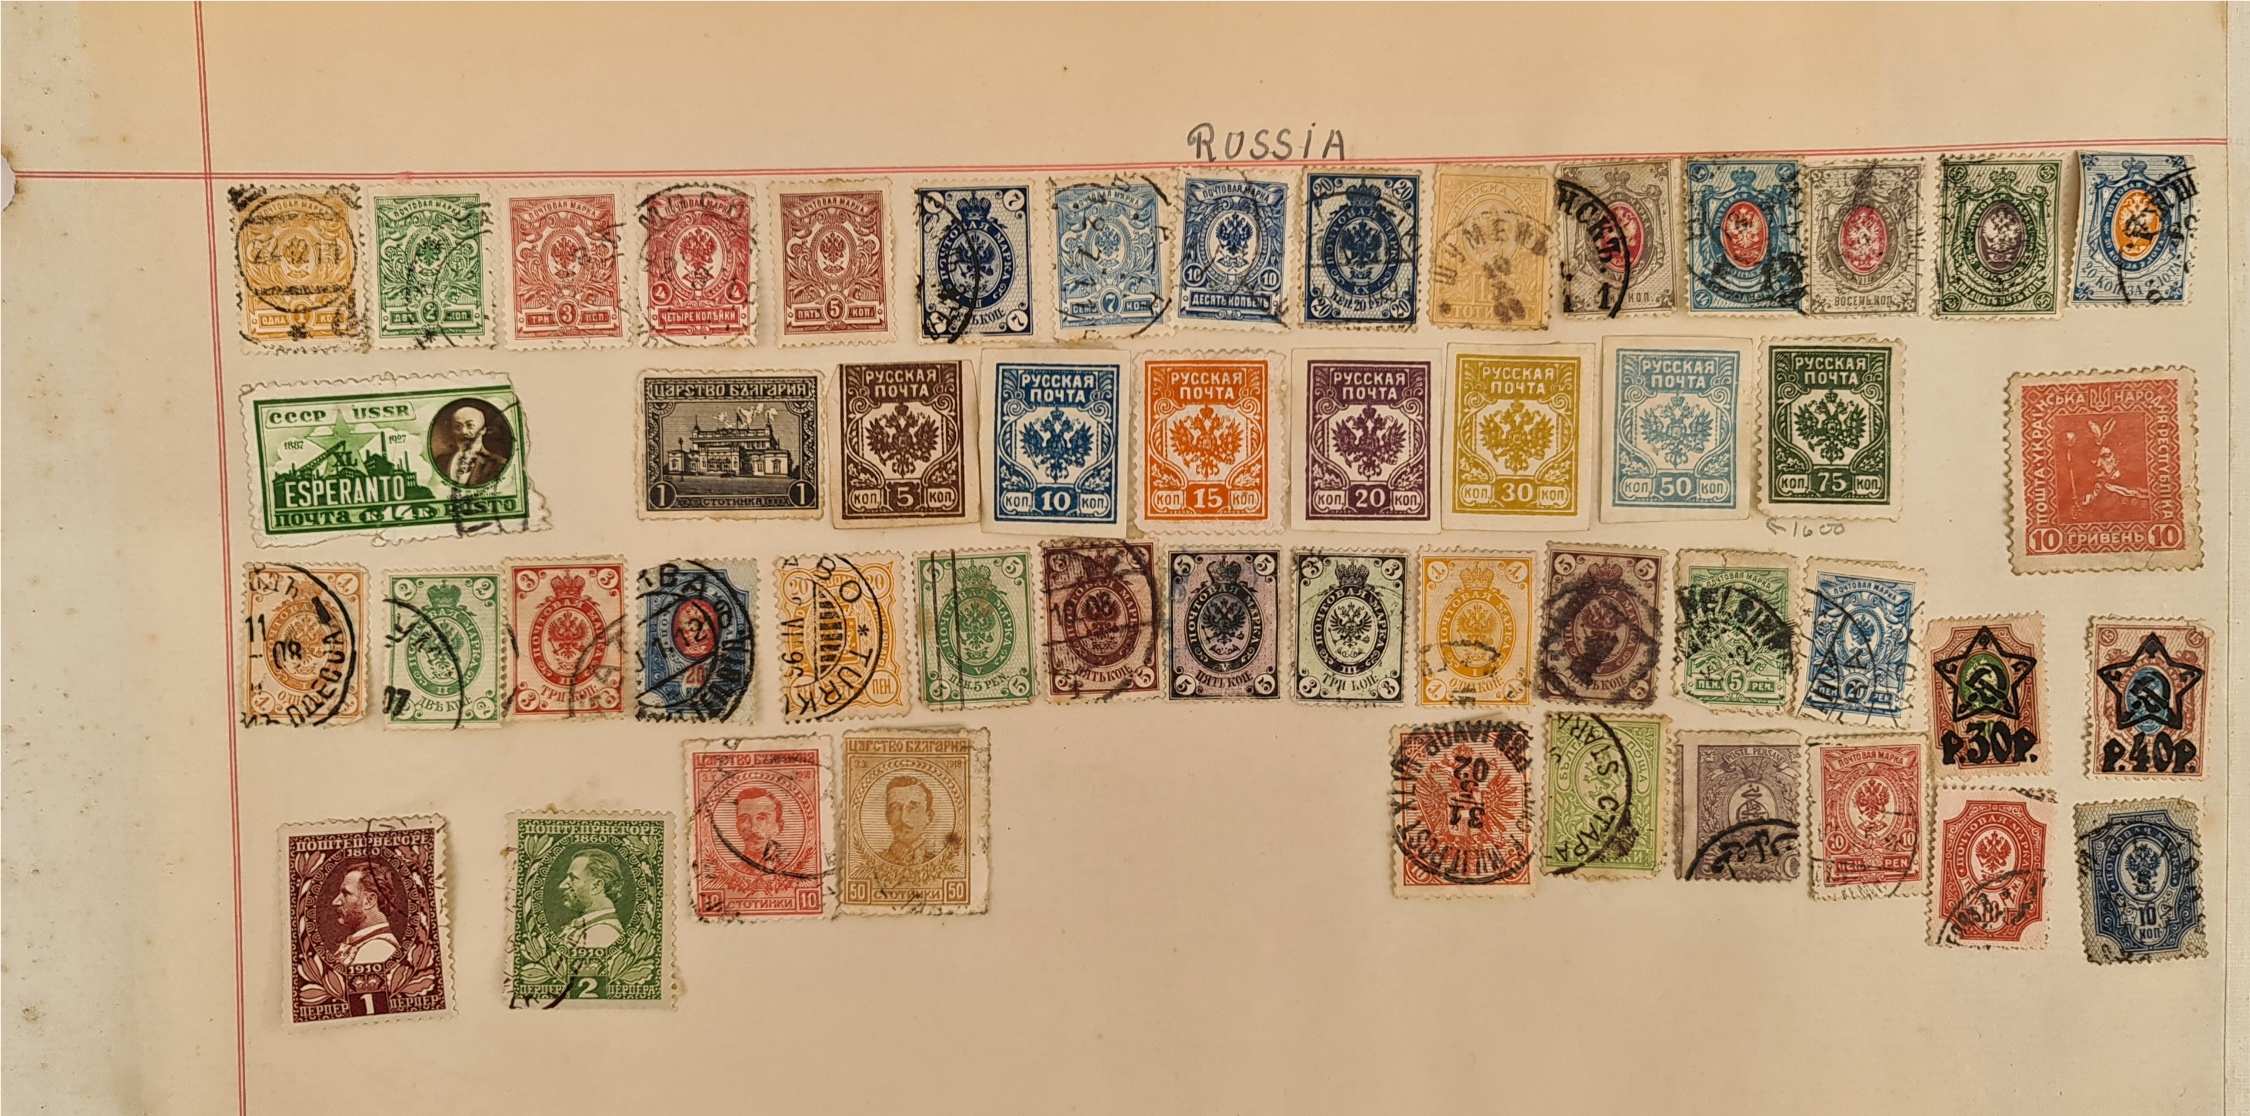 Antique Parcel of 120 Russia China & India Postage Stamps - Image 3 of 3